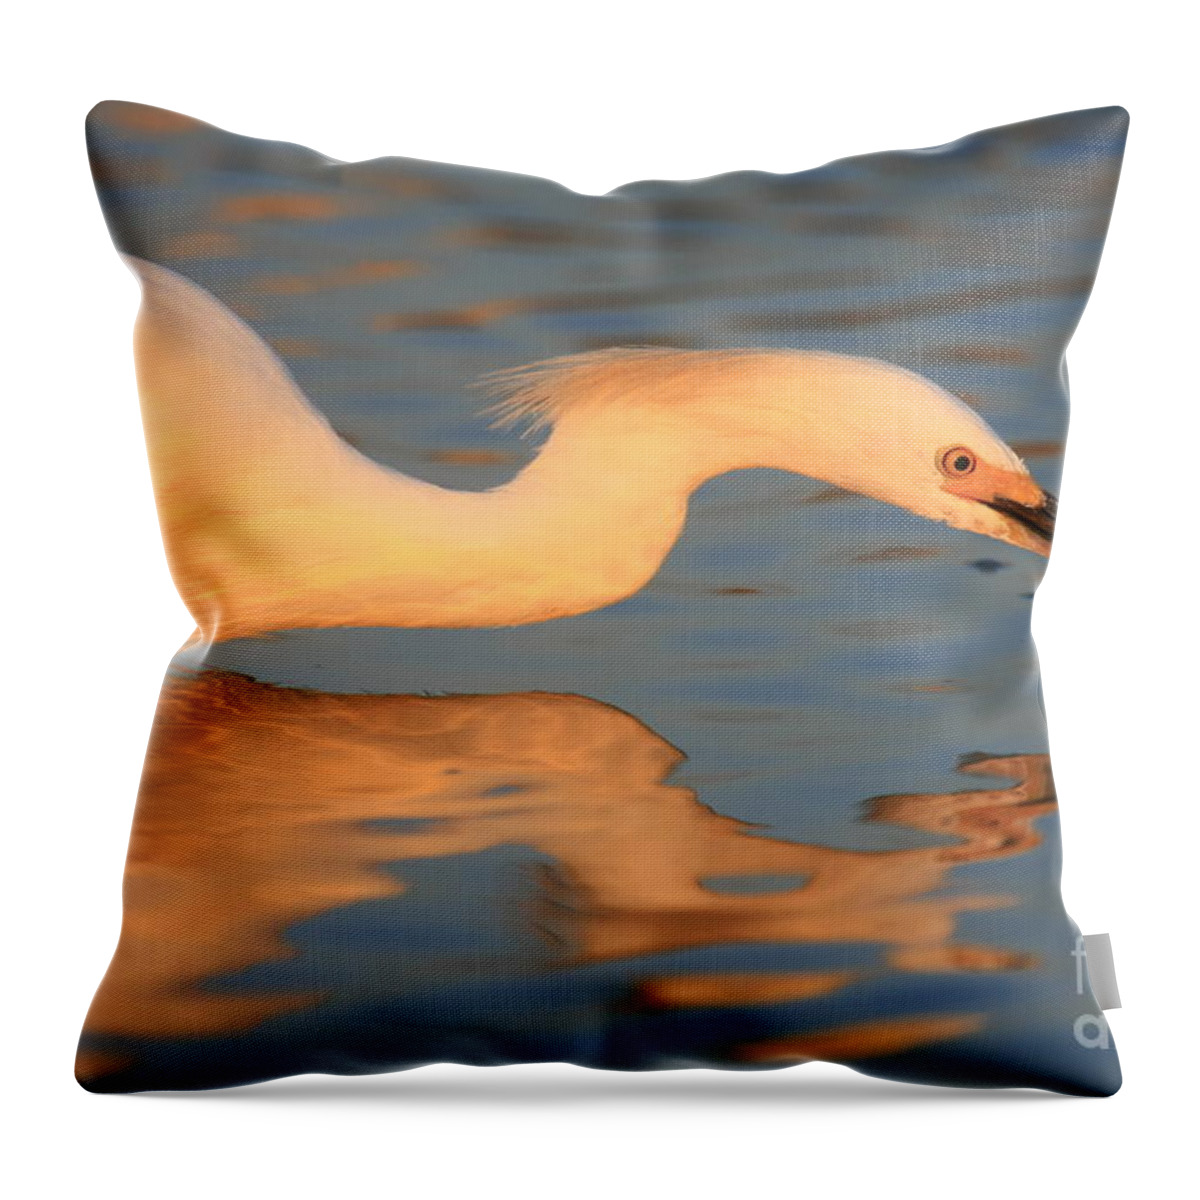 Reflections Throw Pillow featuring the photograph Mirror by John F Tsumas